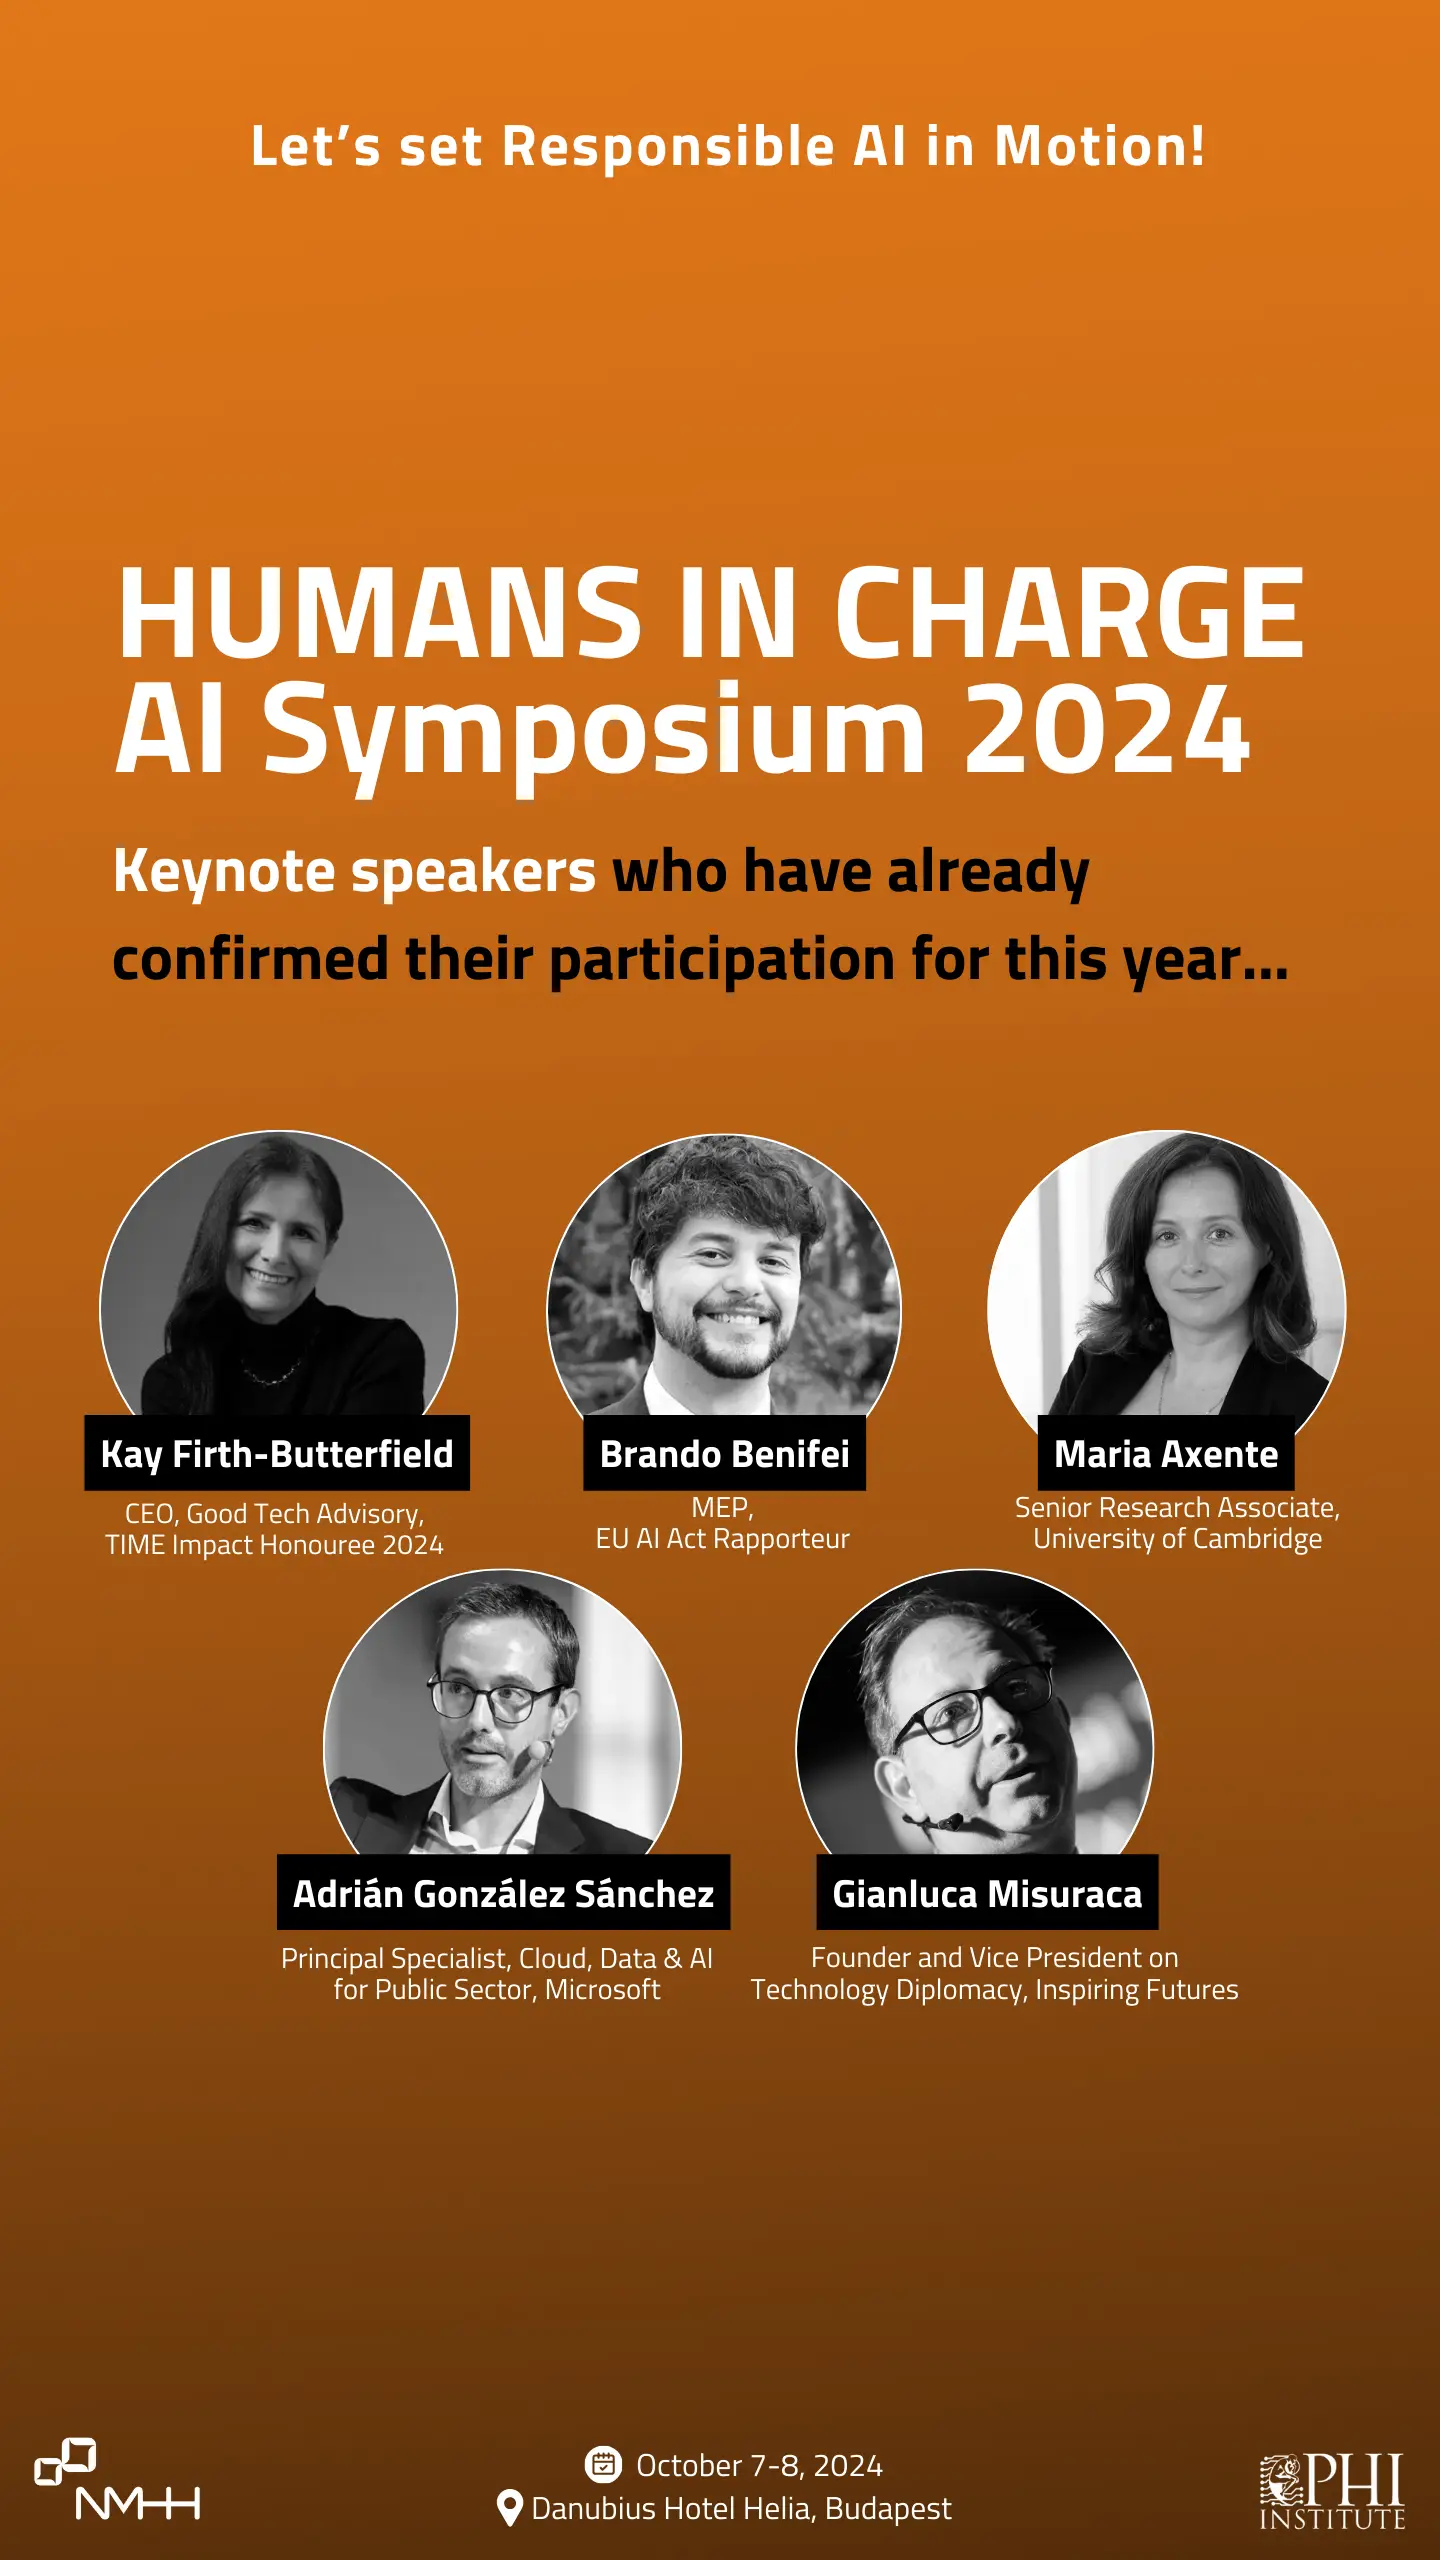 Pictured are the keynote speakers who are sure to attend the NMHH 2024 Artificial Intelligence Conference. They are Kay Firth-Butterfield, Managing Director of Good Tech Advisory; Brando Benifei MEP; Maria Axente, Senior Research Fellow at the University of Cambridge; Adrian Gonzalez Sanchez, Microsoft expert and Gianluca Misuraca, Founder and Vice President of Inspiring Futures, a global consultancy.